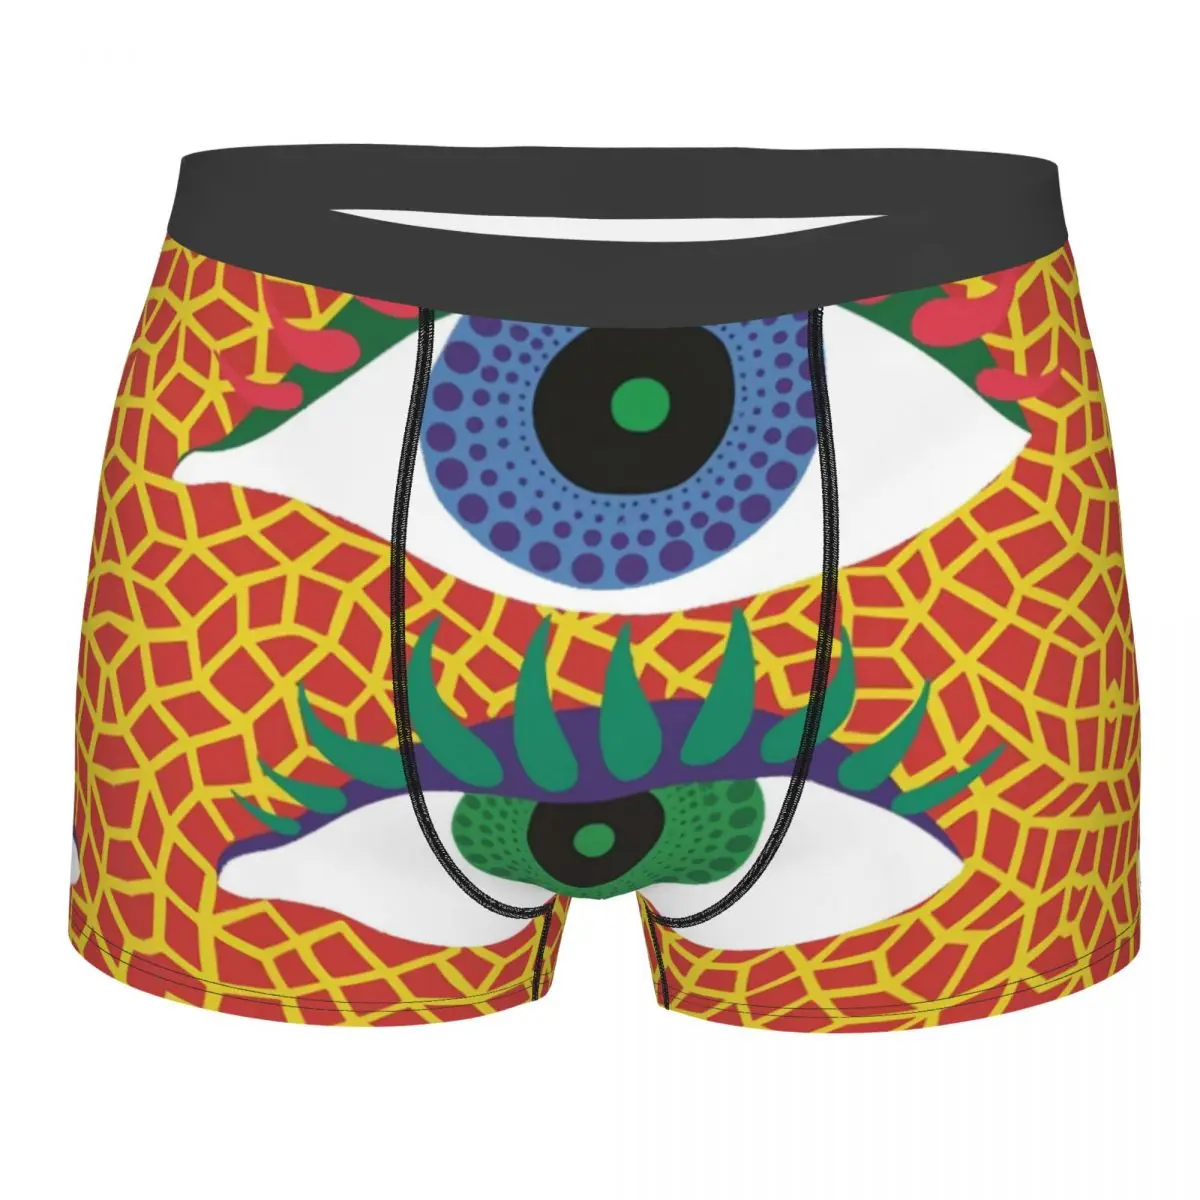 

Two Eye Yayoi Kusama Man Underwear Polka Aesthetic Boxer Briefs Shorts Panties Funny Soft Underpants for Male S-XXL